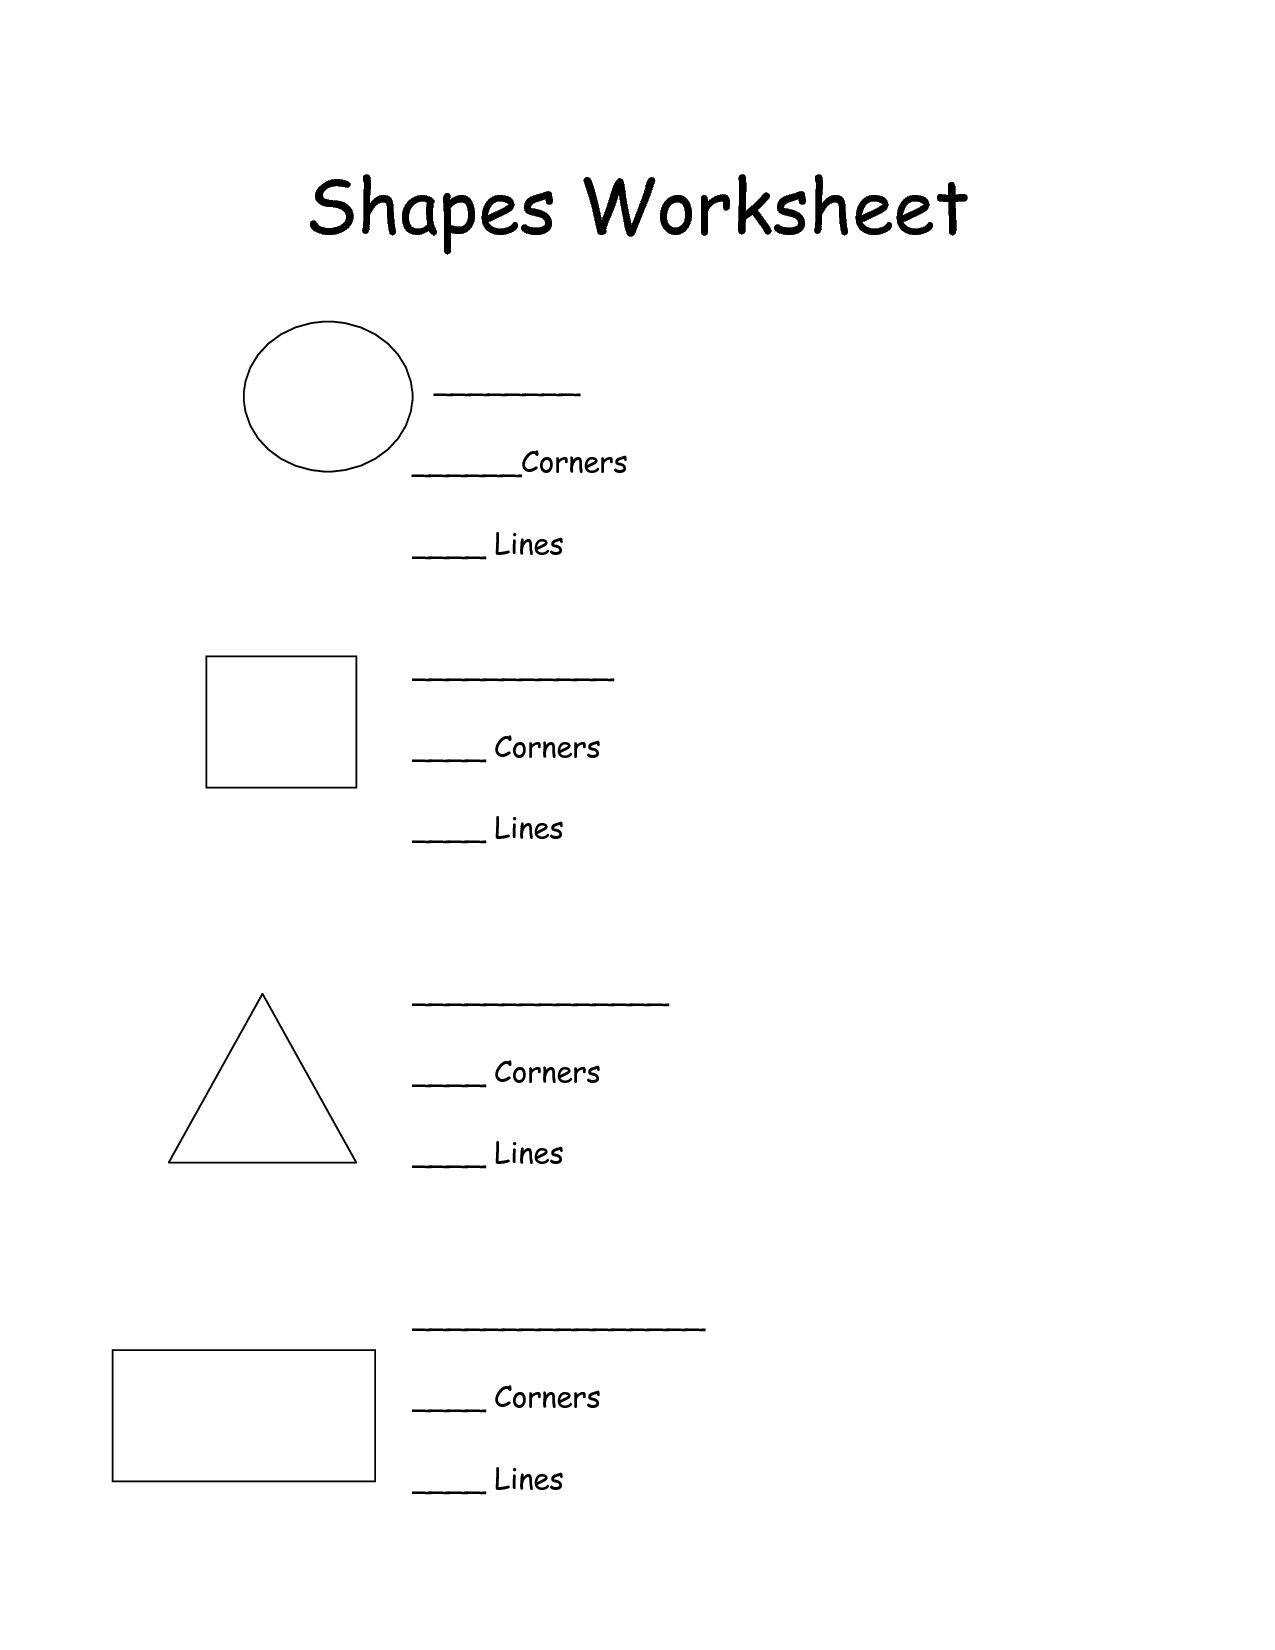 8-best-images-of-shapes-worksheets-for-first-grade-math-shapes-worksheet-first-grade-3d